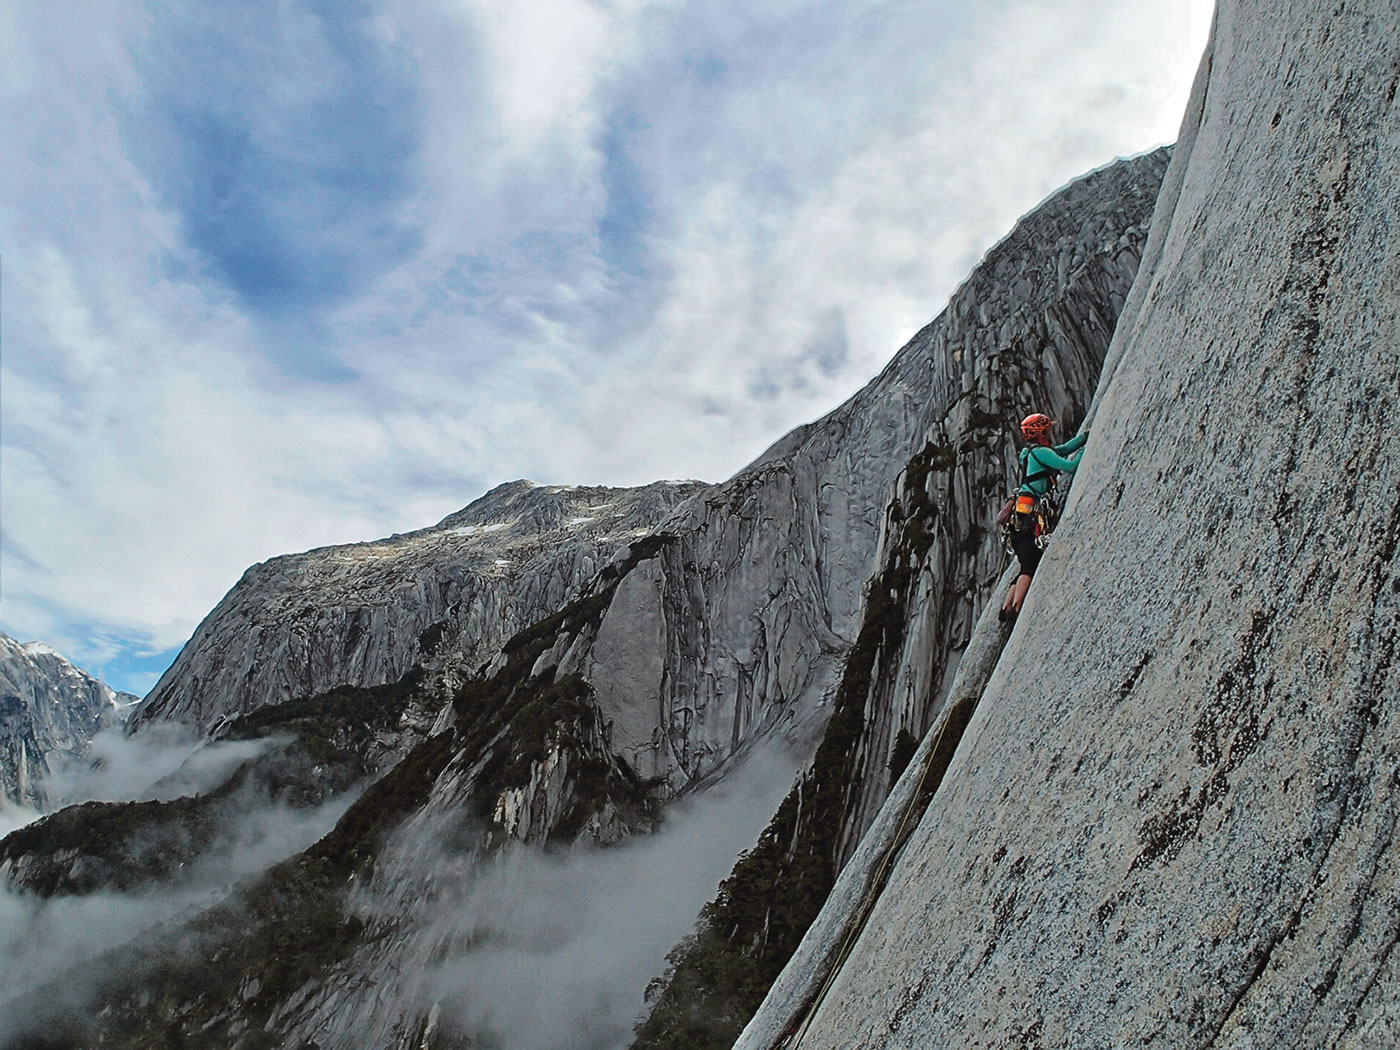 Sauter leads the A3 crux of Cenizas a Cenizas during the 2014 first ascent of El Hermano. In 2013 Sauter and Mayan Smith-Gobat set the women's speed record on El Capitan's Nose. [Photo] Althea Rogers